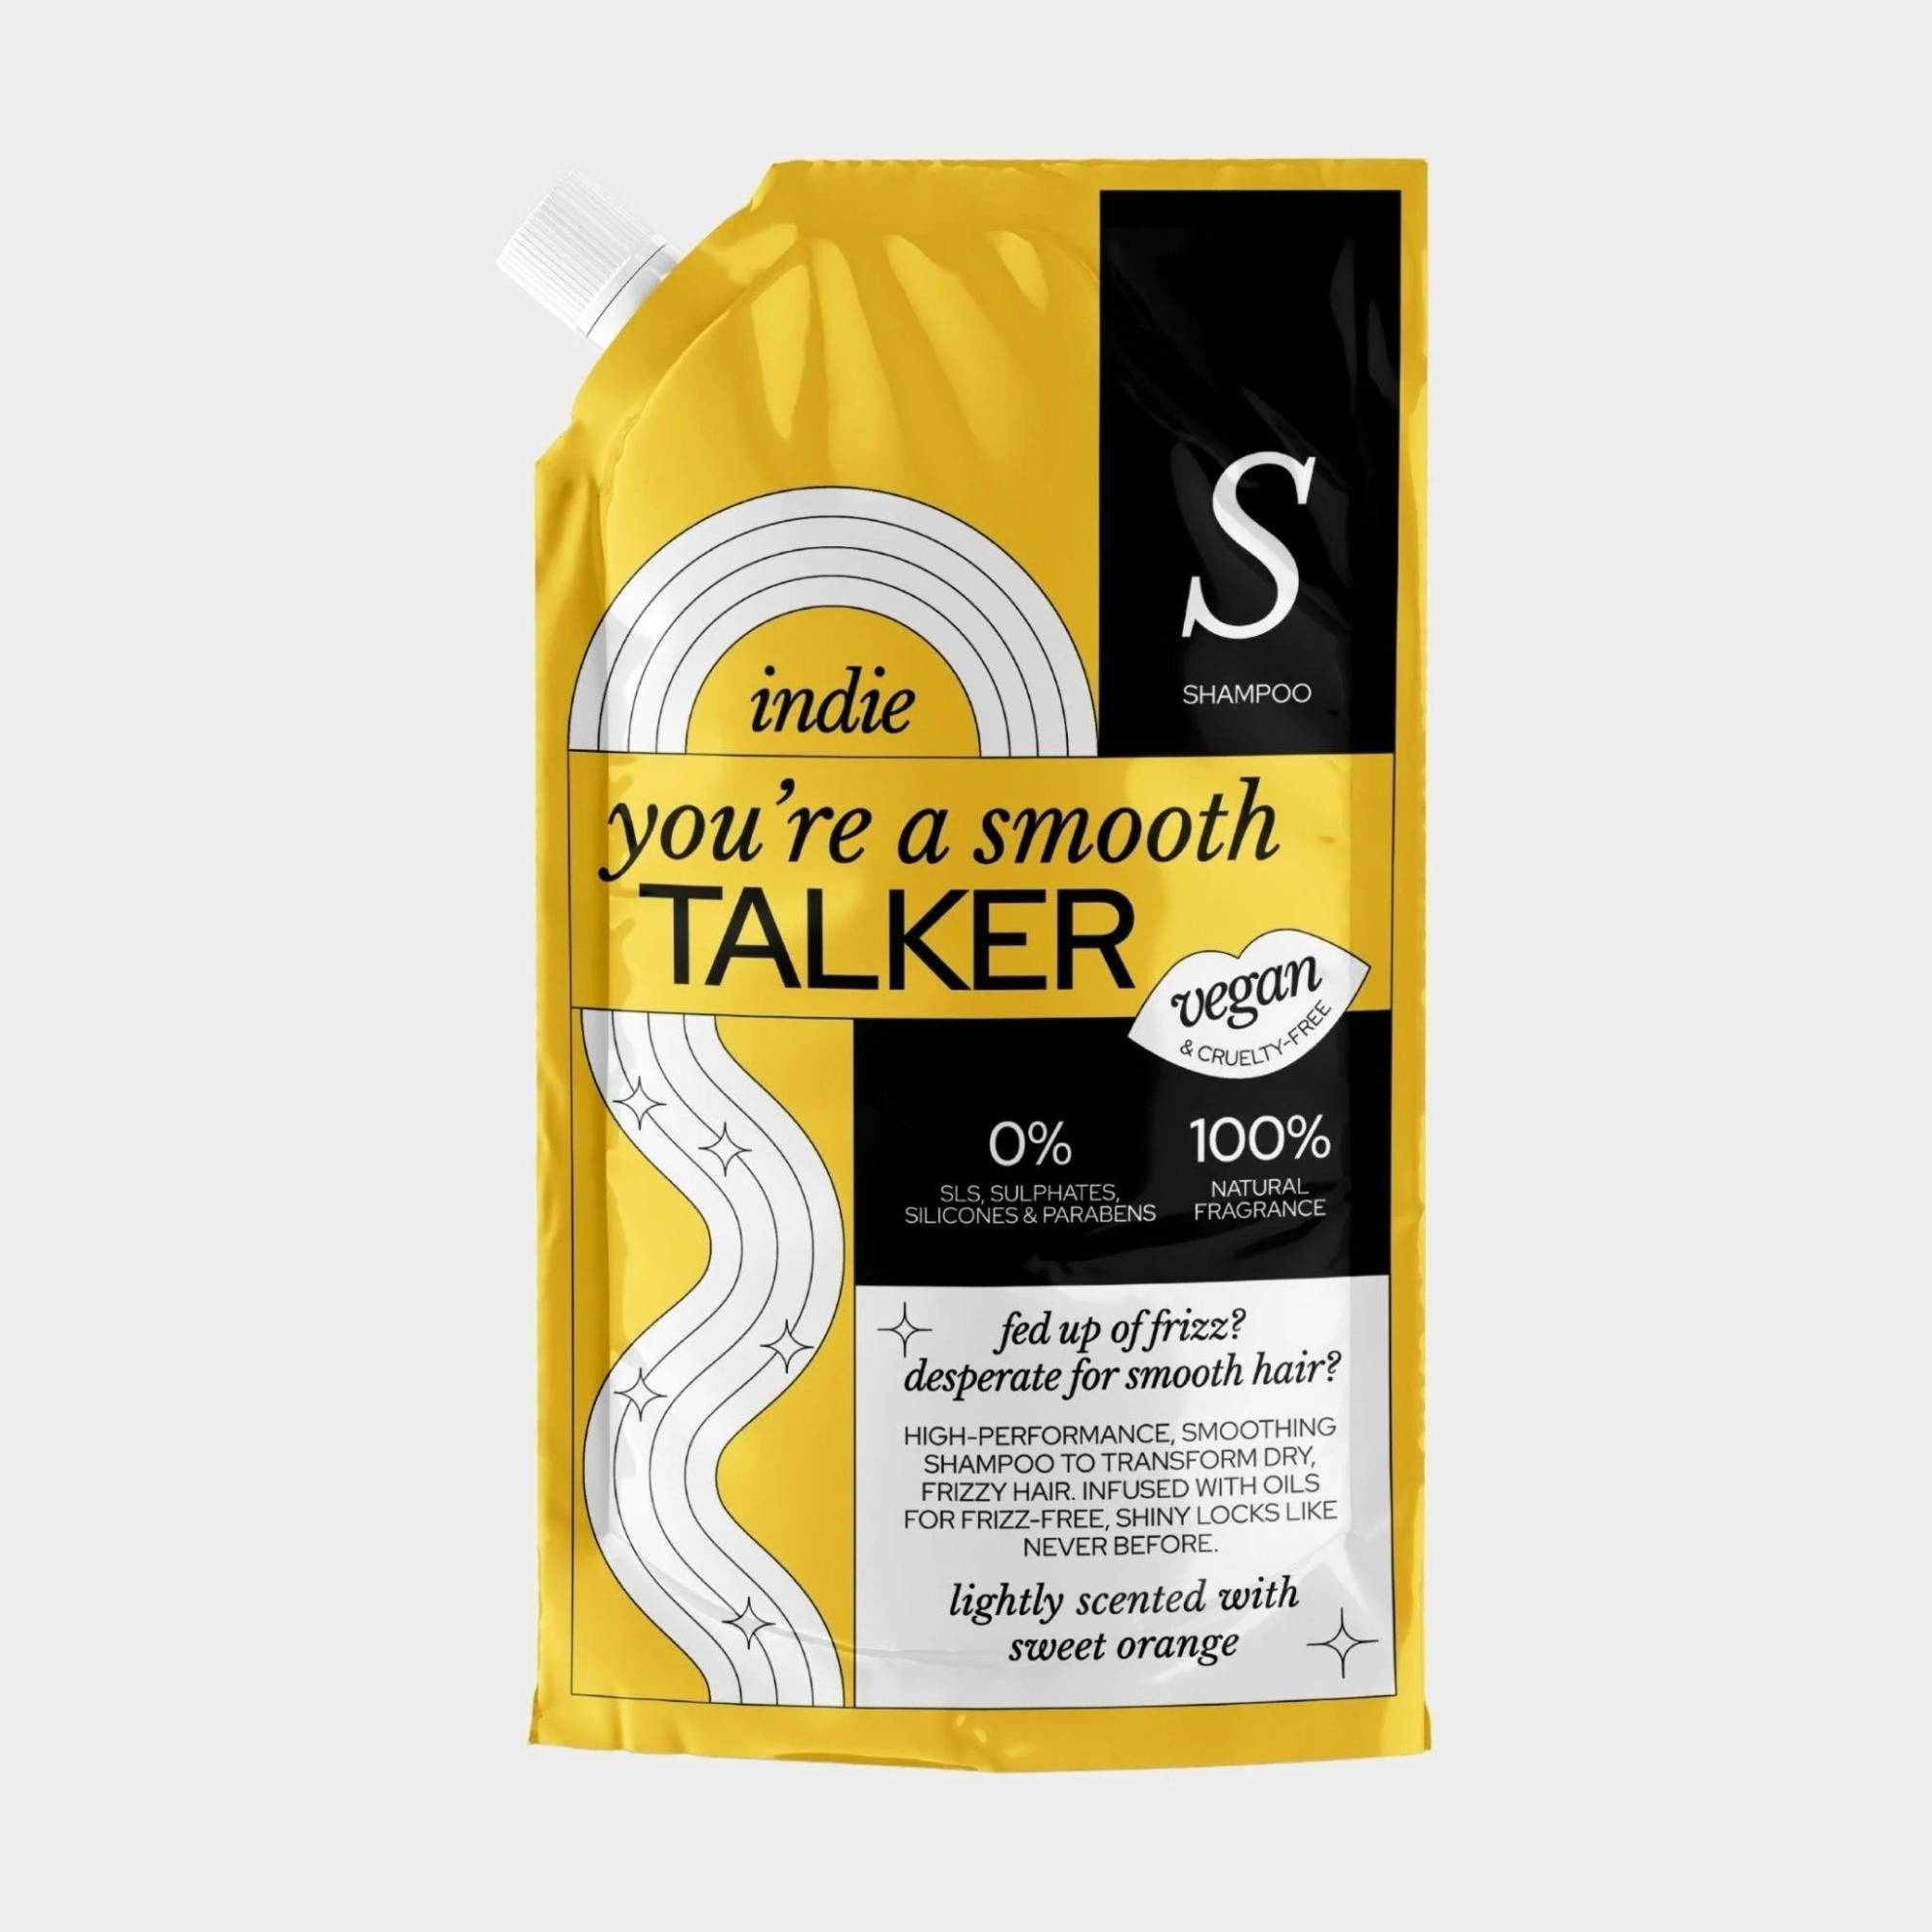 Indie You're a Smooth Talker Shampoo